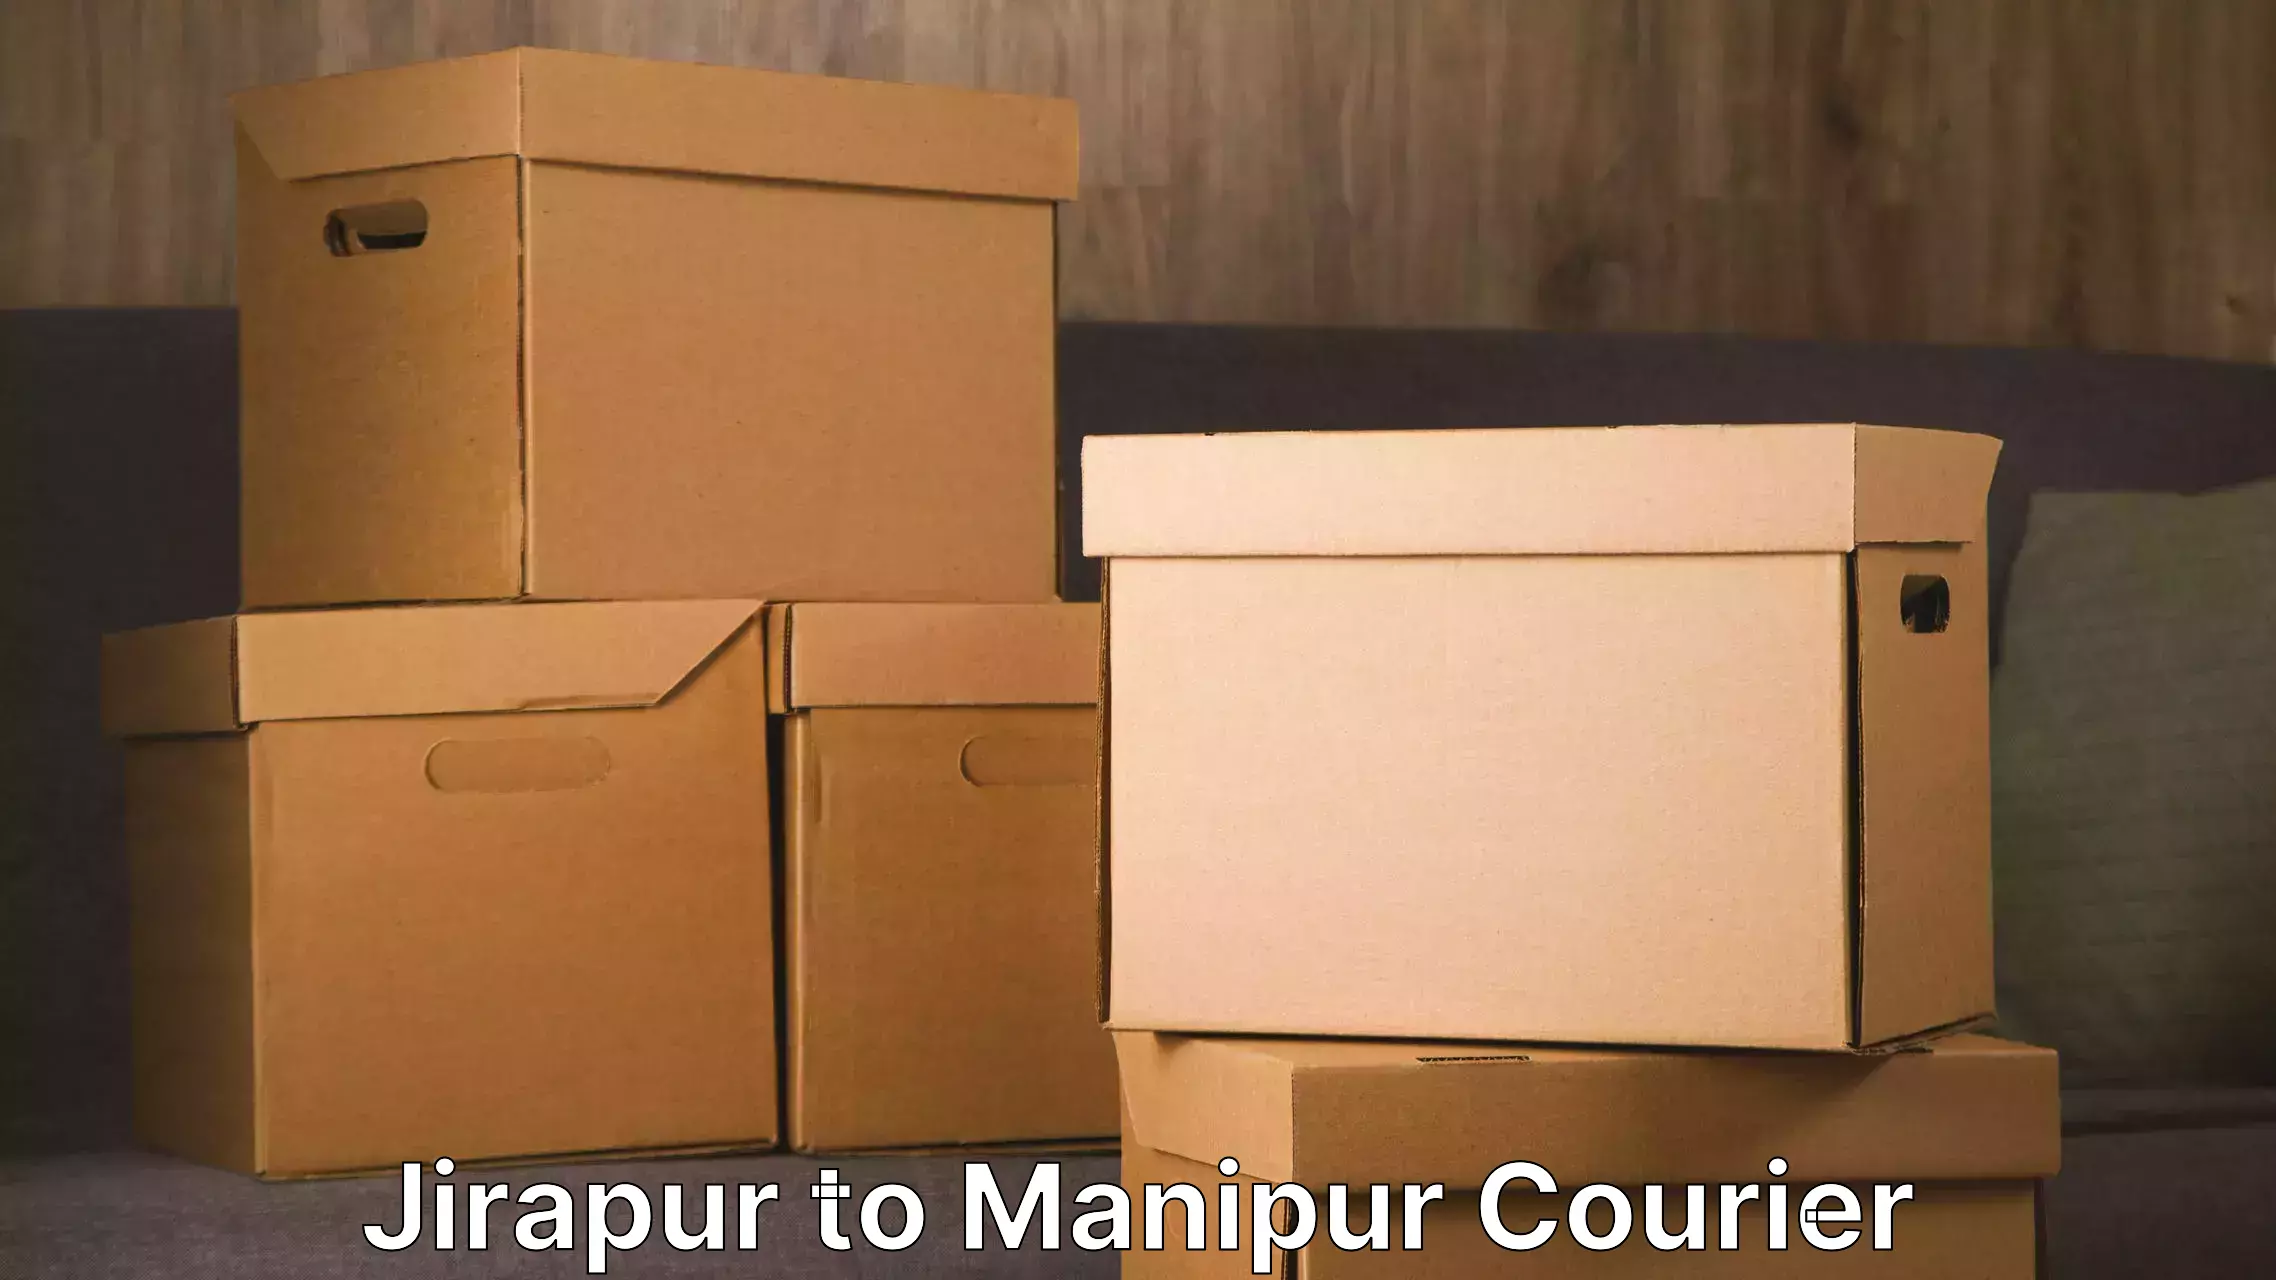 Efficient furniture movers Jirapur to Chandel